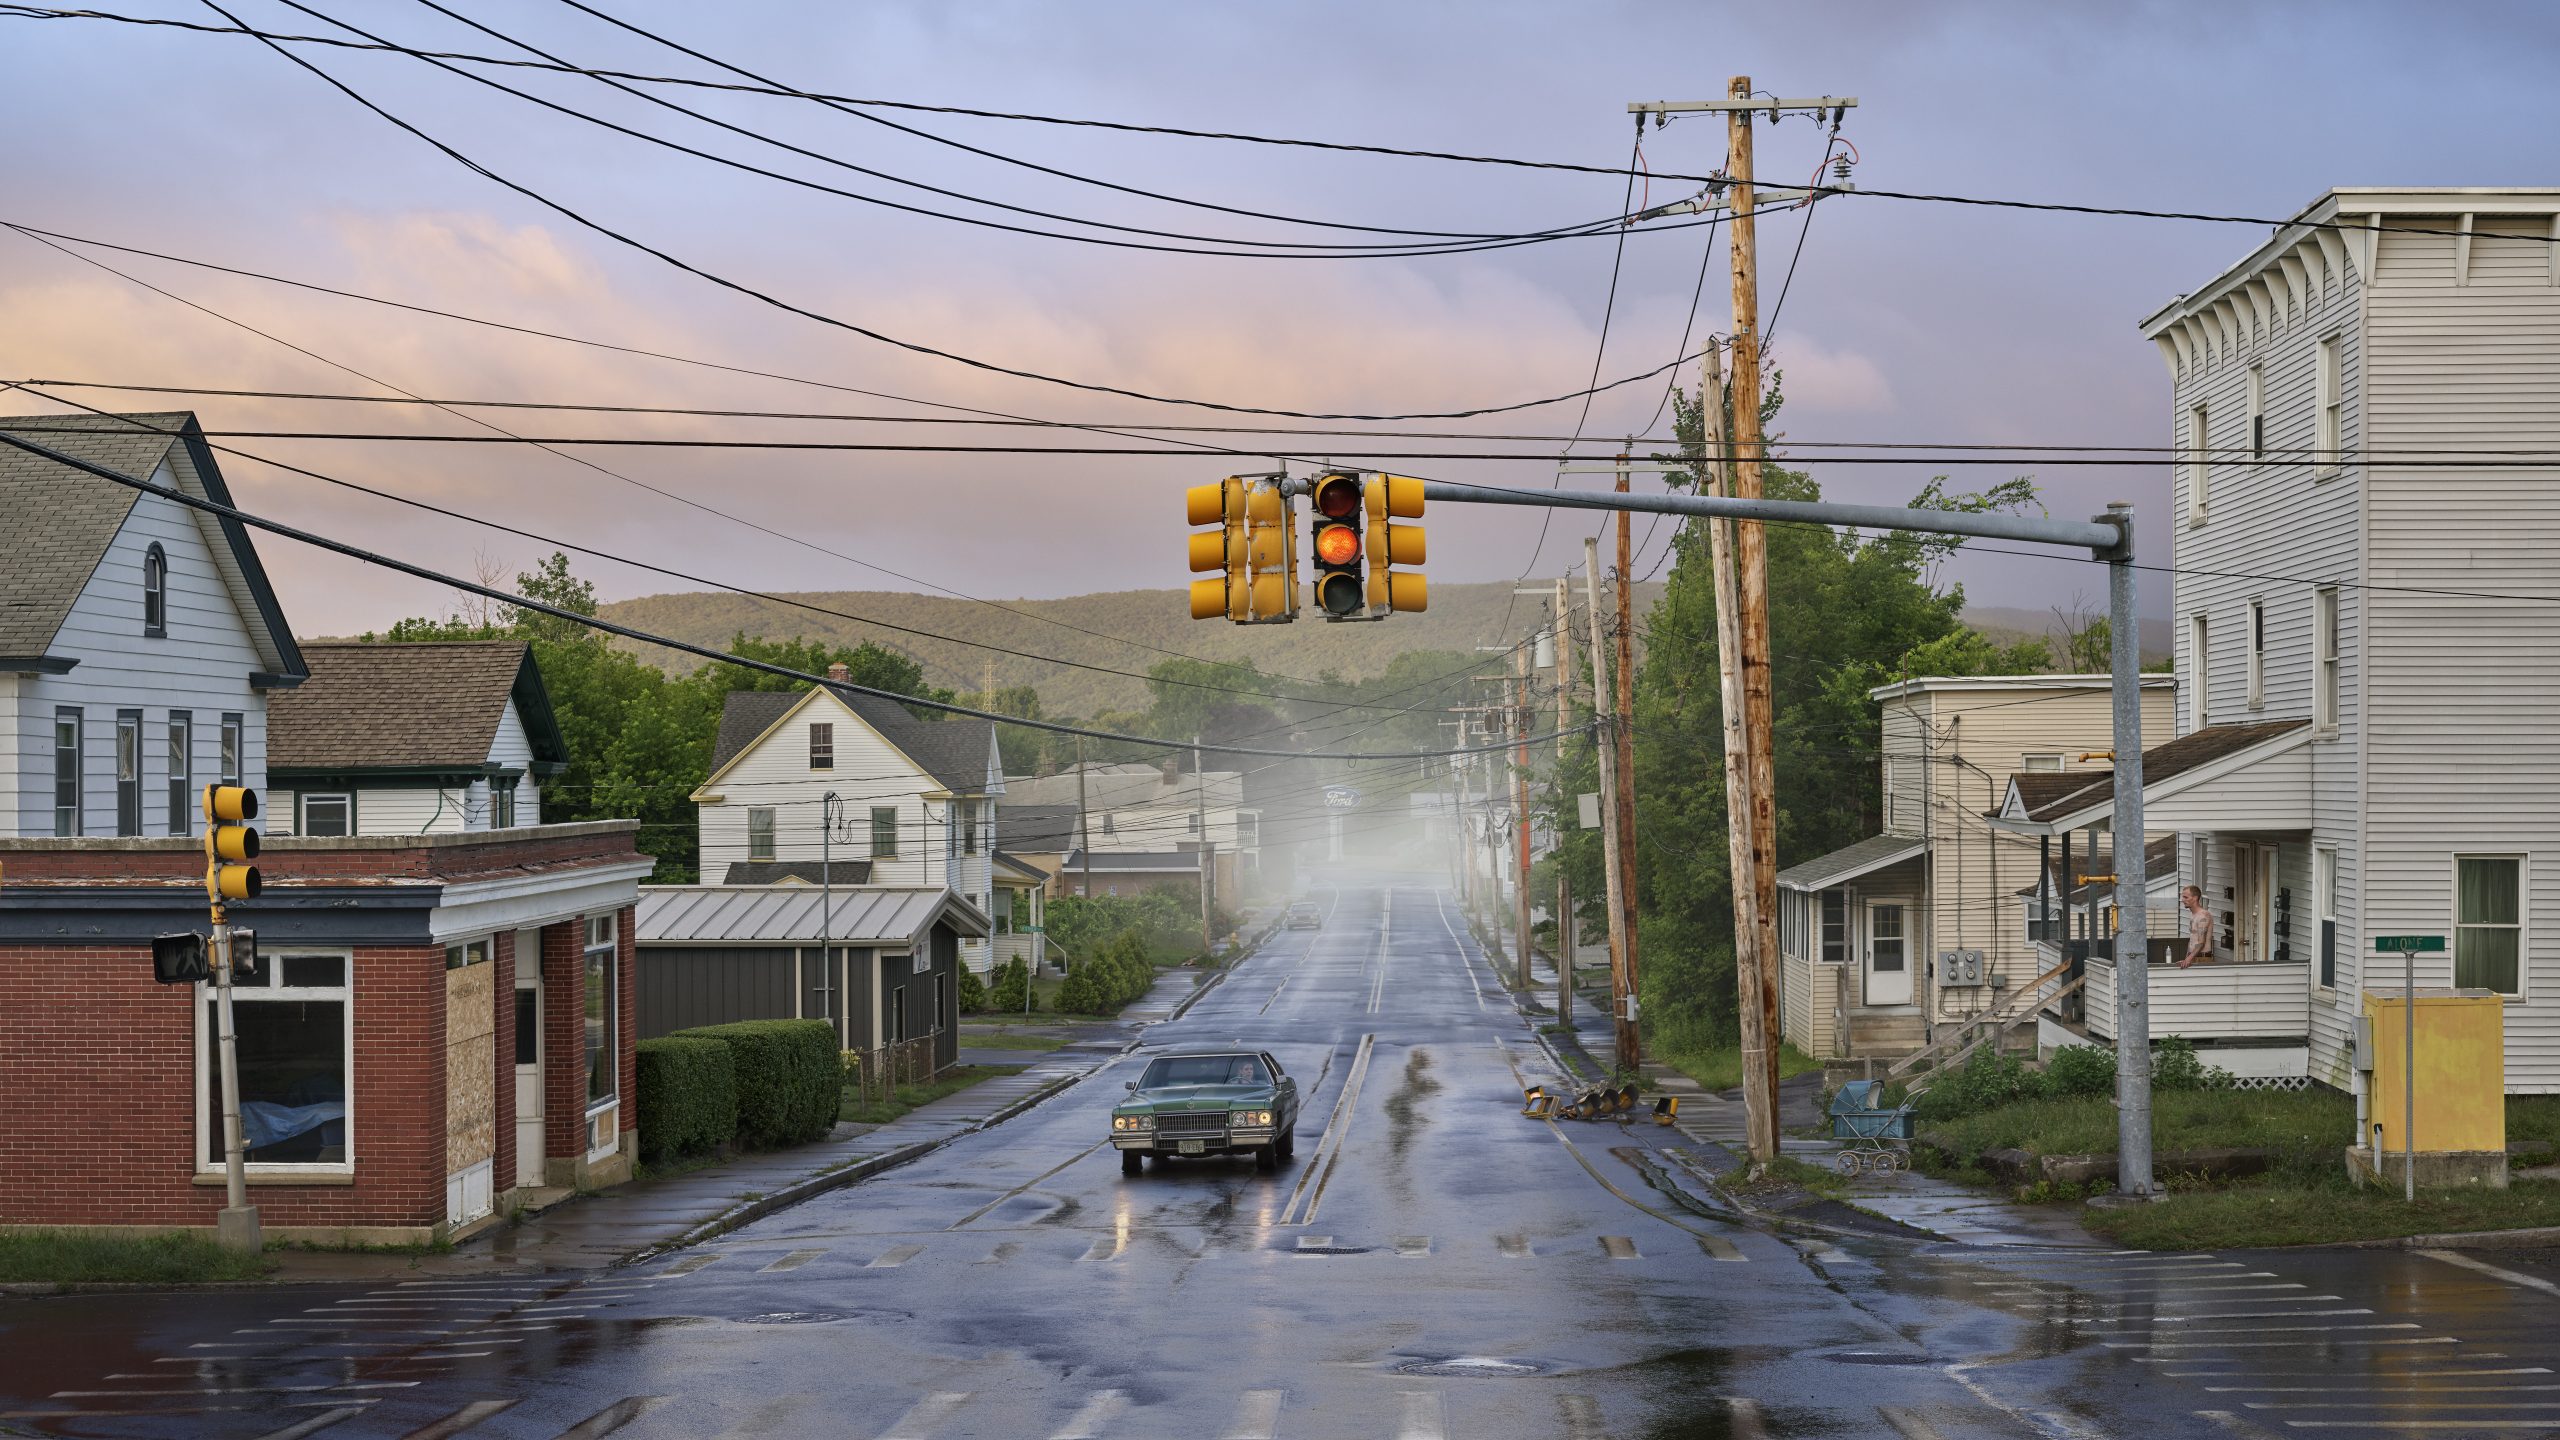 GREGORY CREWDSON, Alone Street, 2018-2019, Digital pigment Print, Image size_ 50 x 88.9 in. © Gregory Crewdson